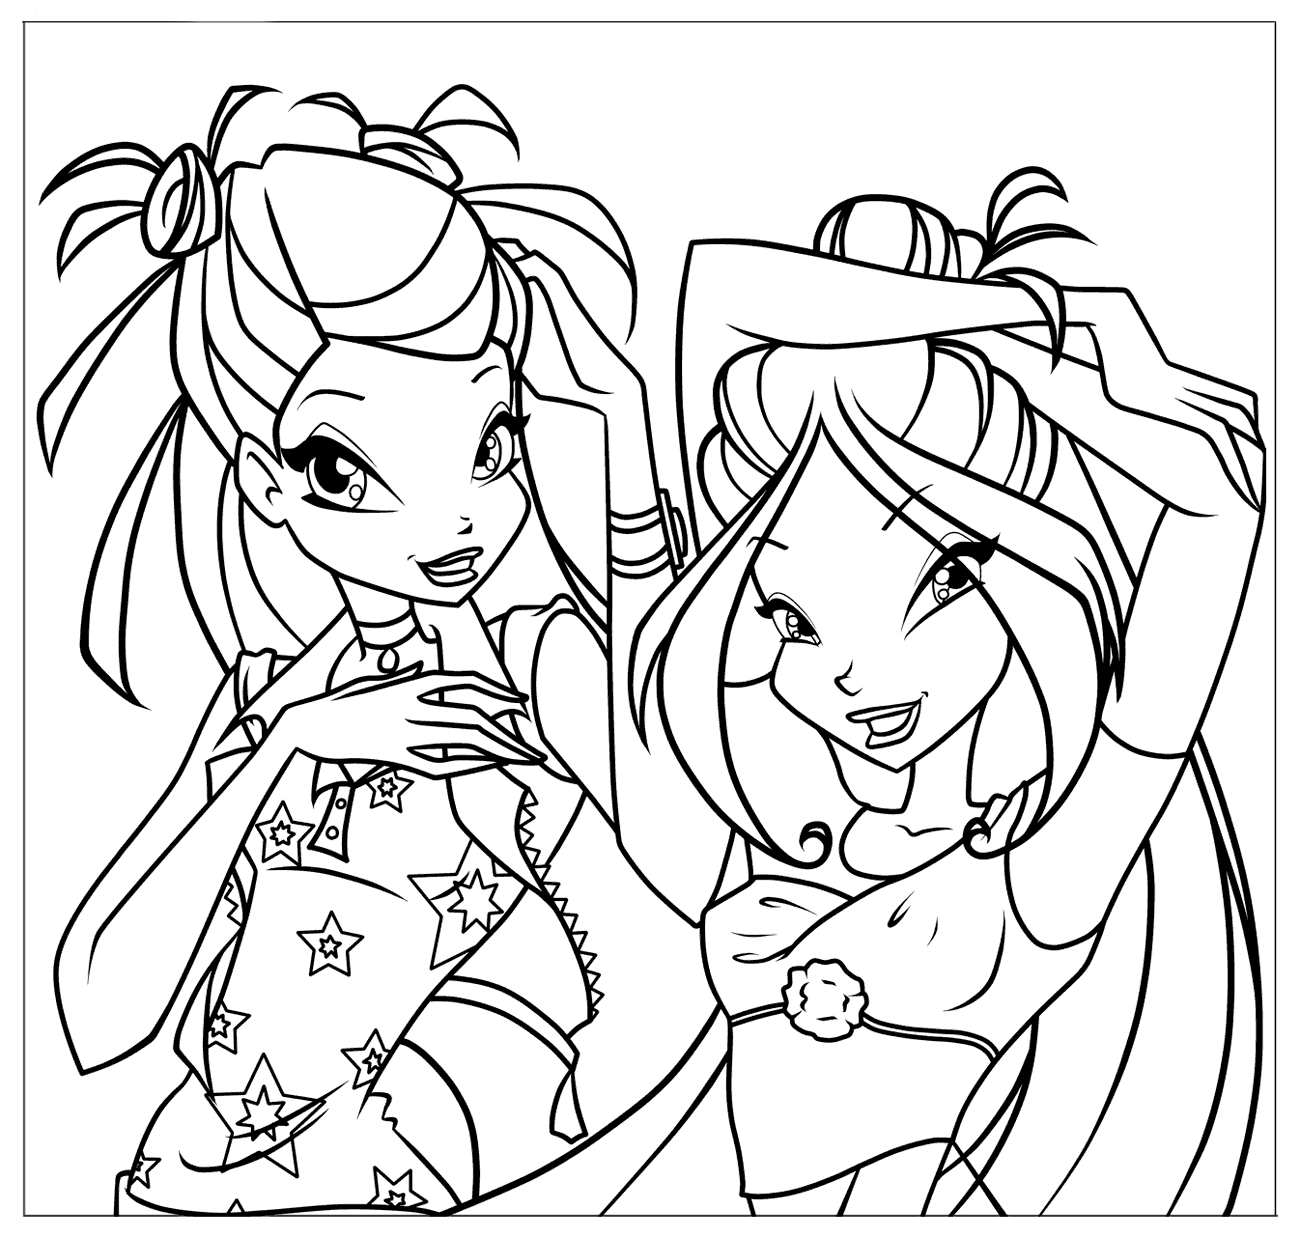 Download Coloring page - Winxs stylish dresses